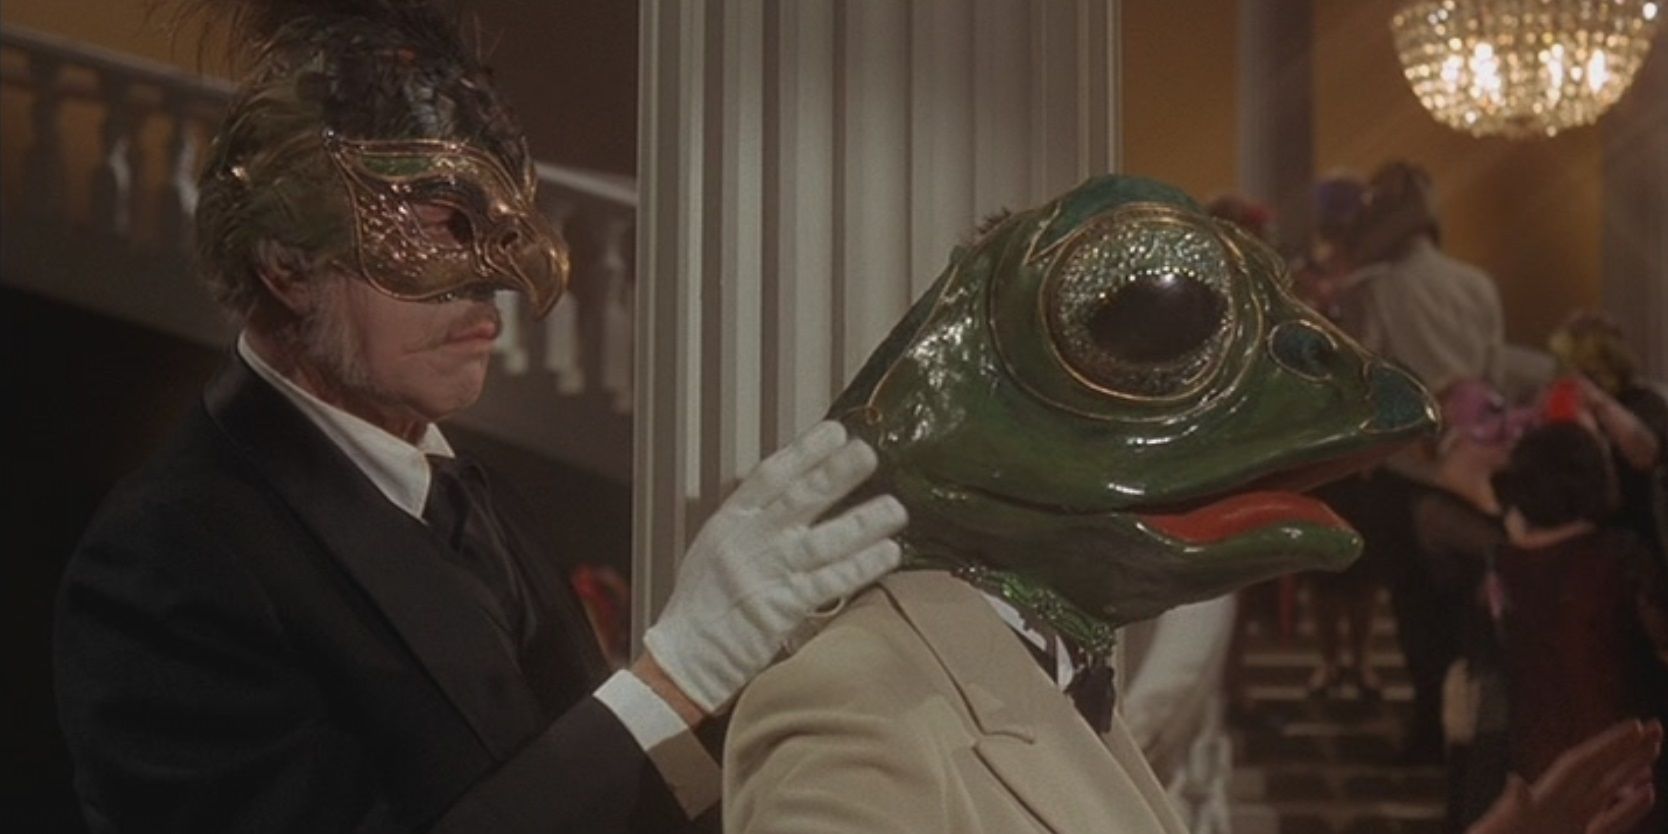 The Abominable Dr Phibes Vincent Price at a Masquerade with a man in a frog mask